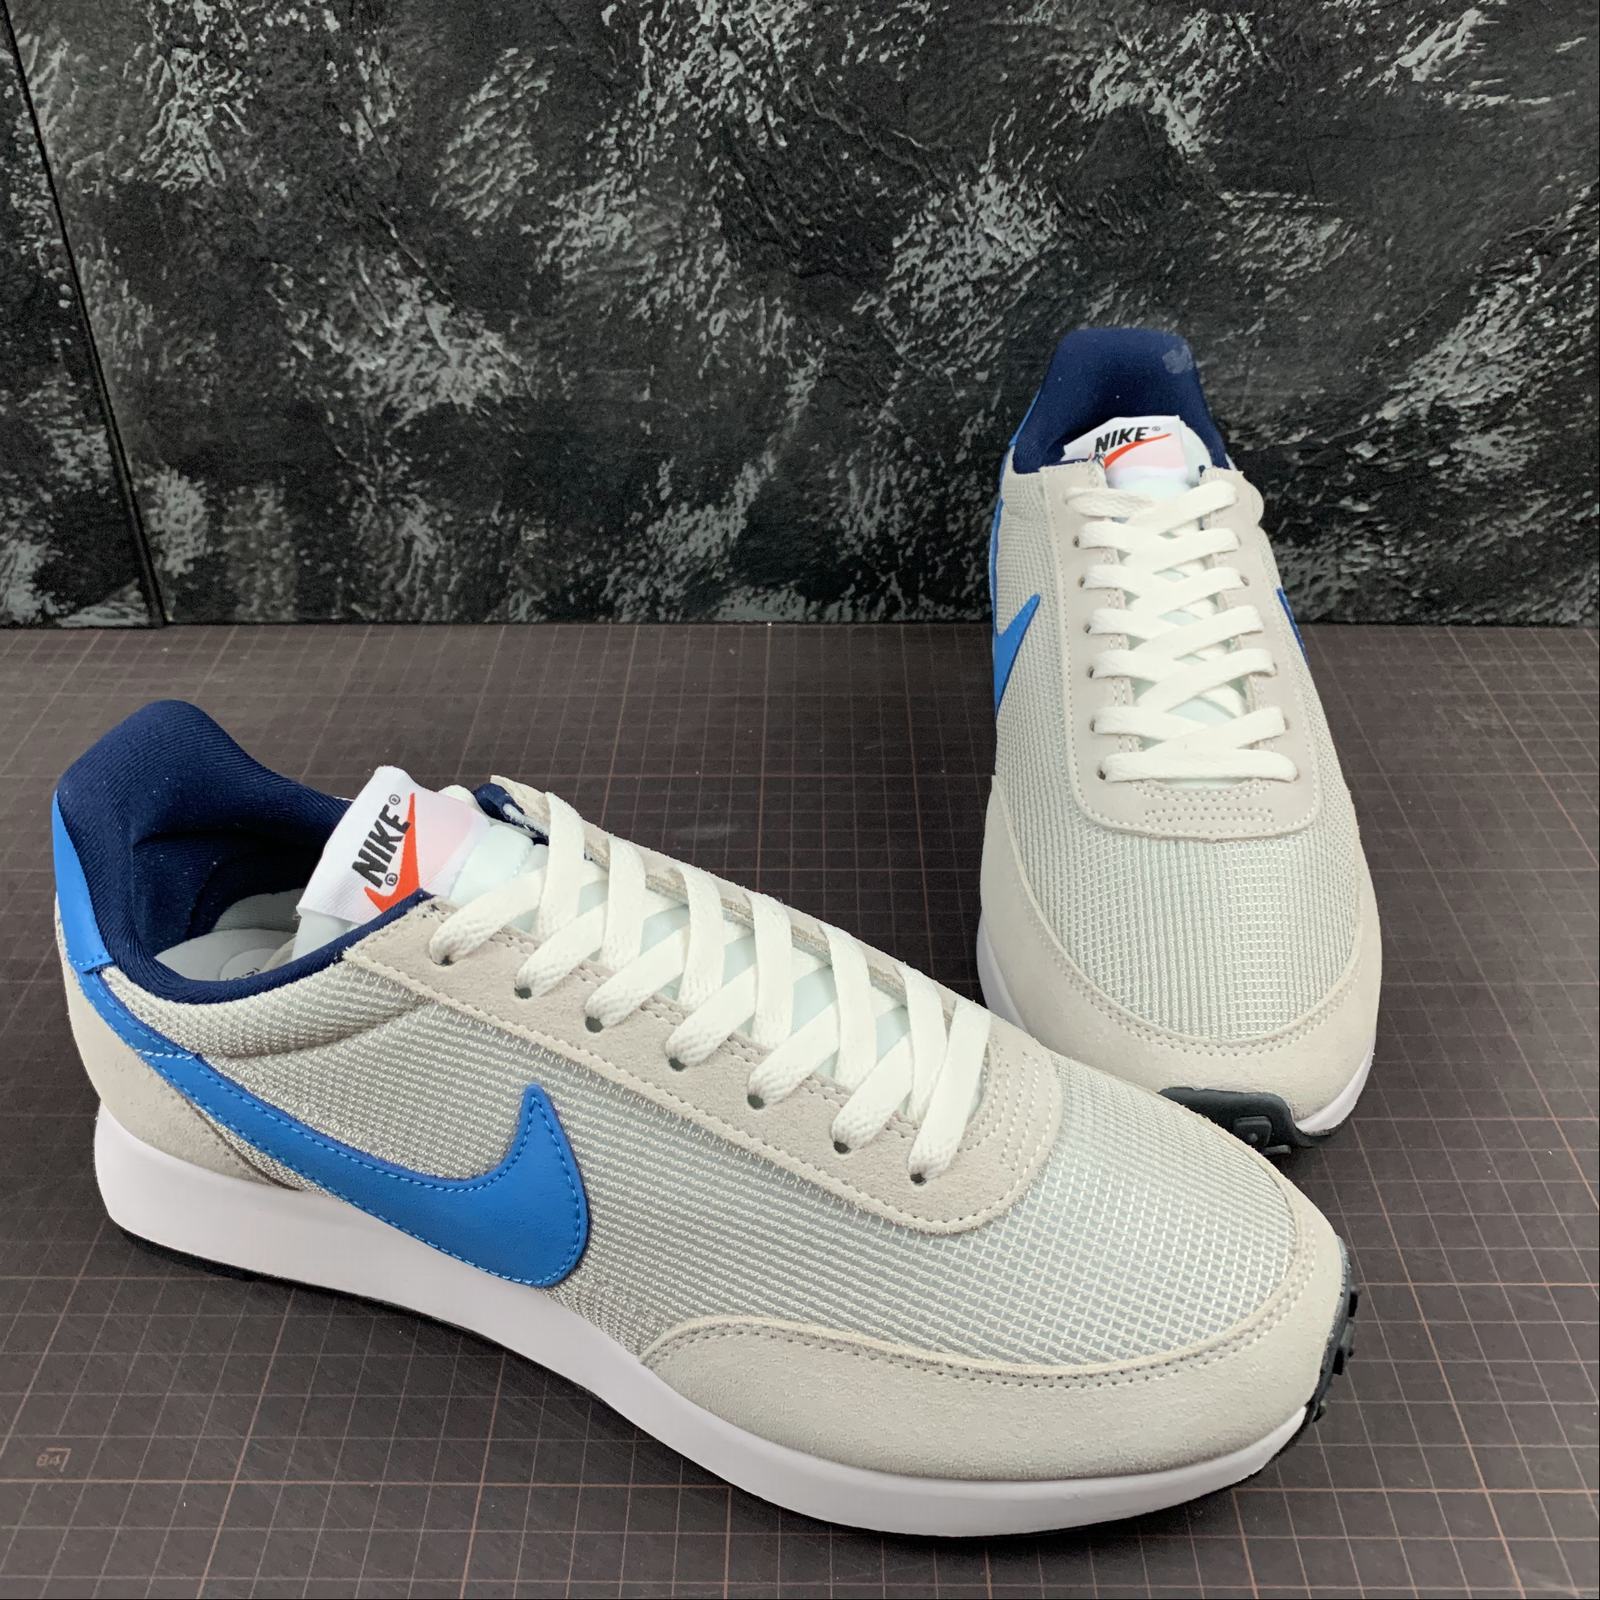 Nike Air Tailwind 79 running shoes light gray blue side